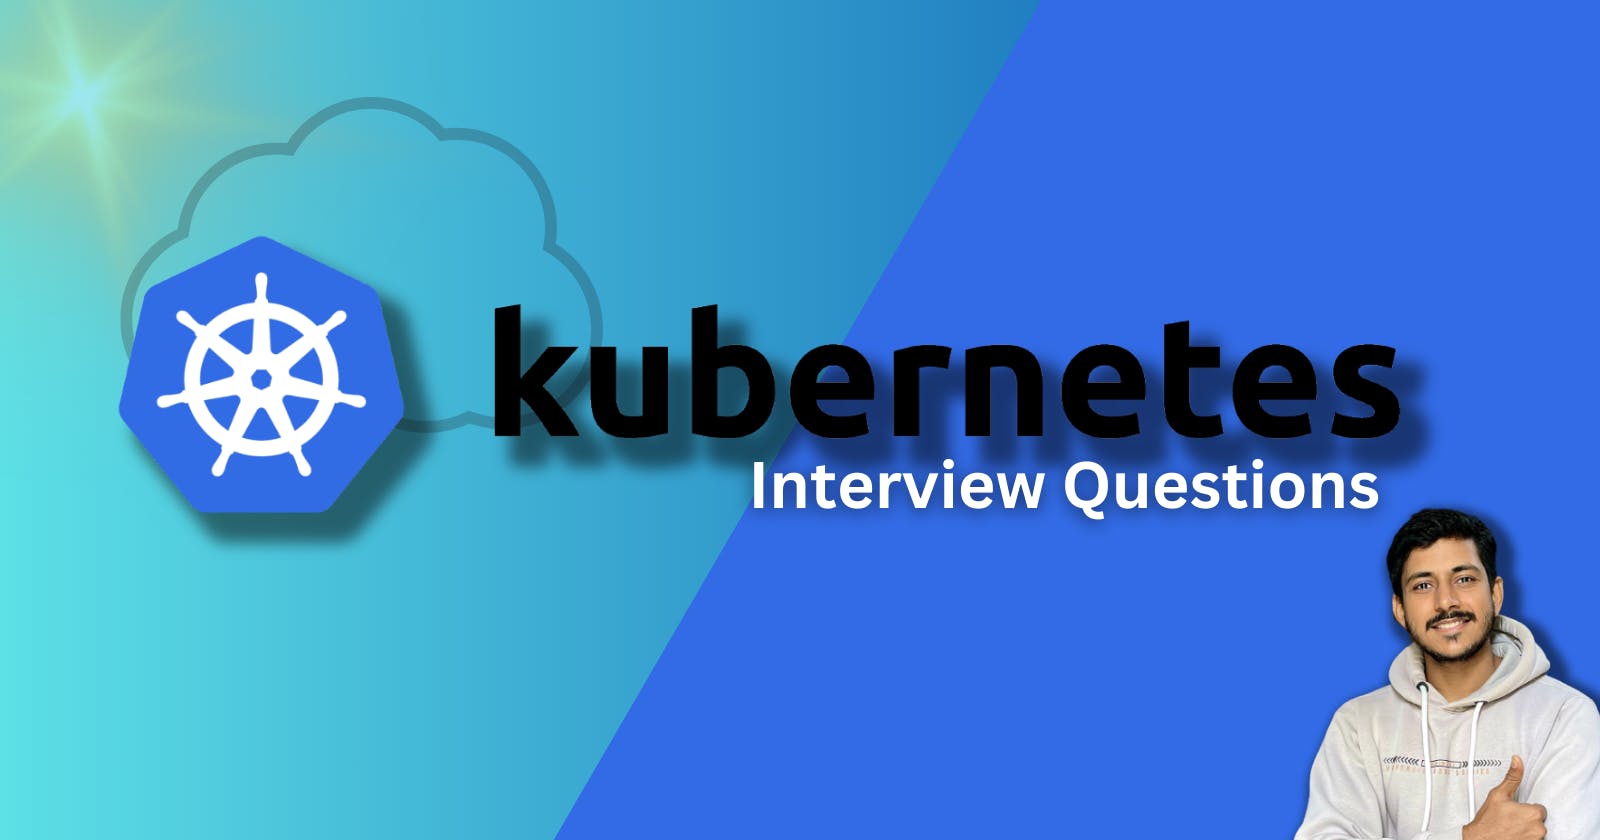 Day 37 of 90DaysOfDevOps Challenge: Kubernetes Important Interview Questions